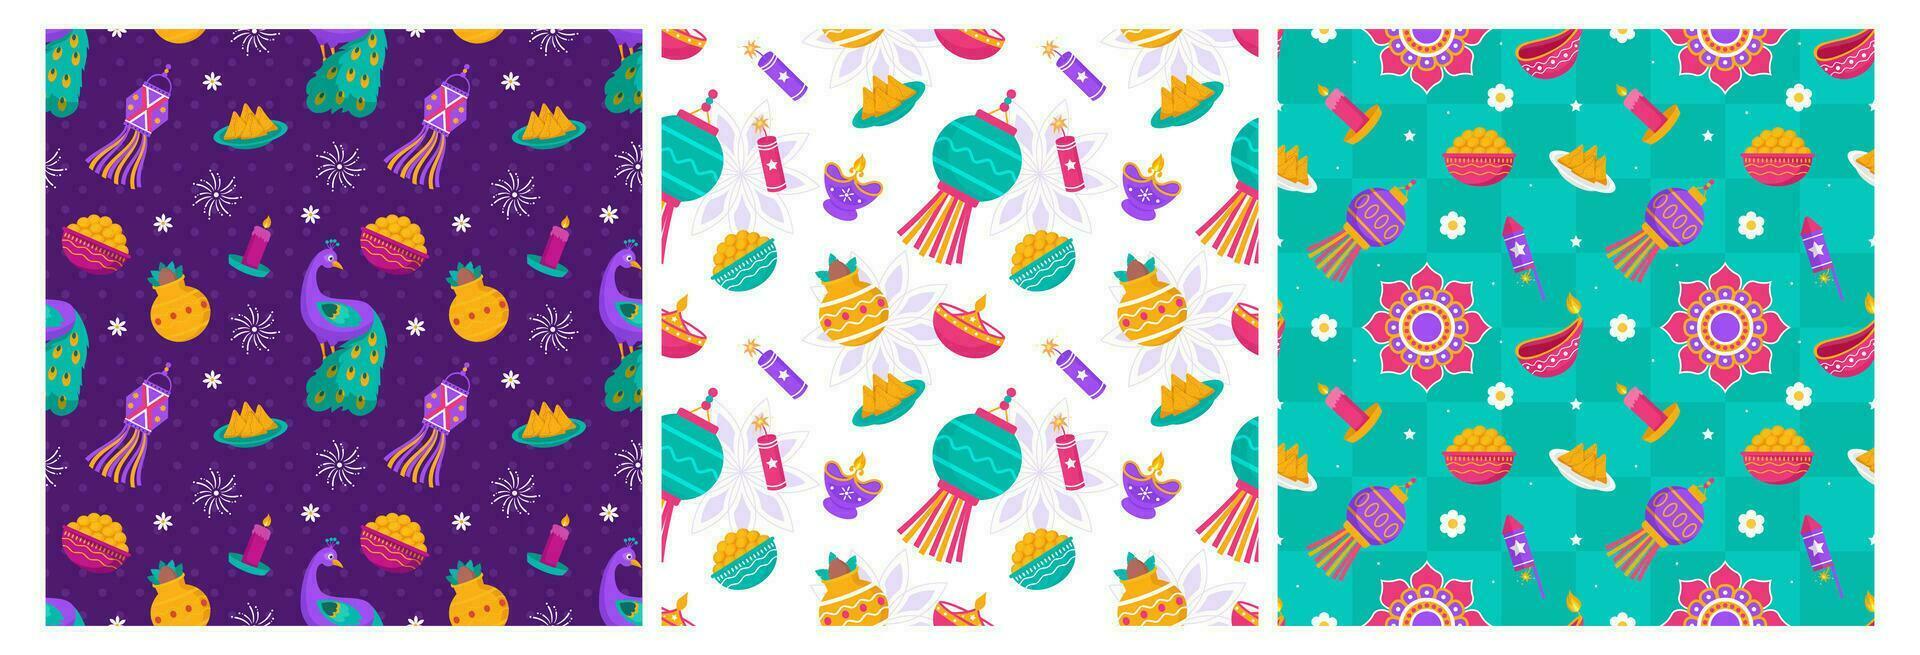 Set of Happy Diwali Seamless Pattern Illustration Design with Light Festival of India Ornament in Cartoon Hand Drawn Template vector